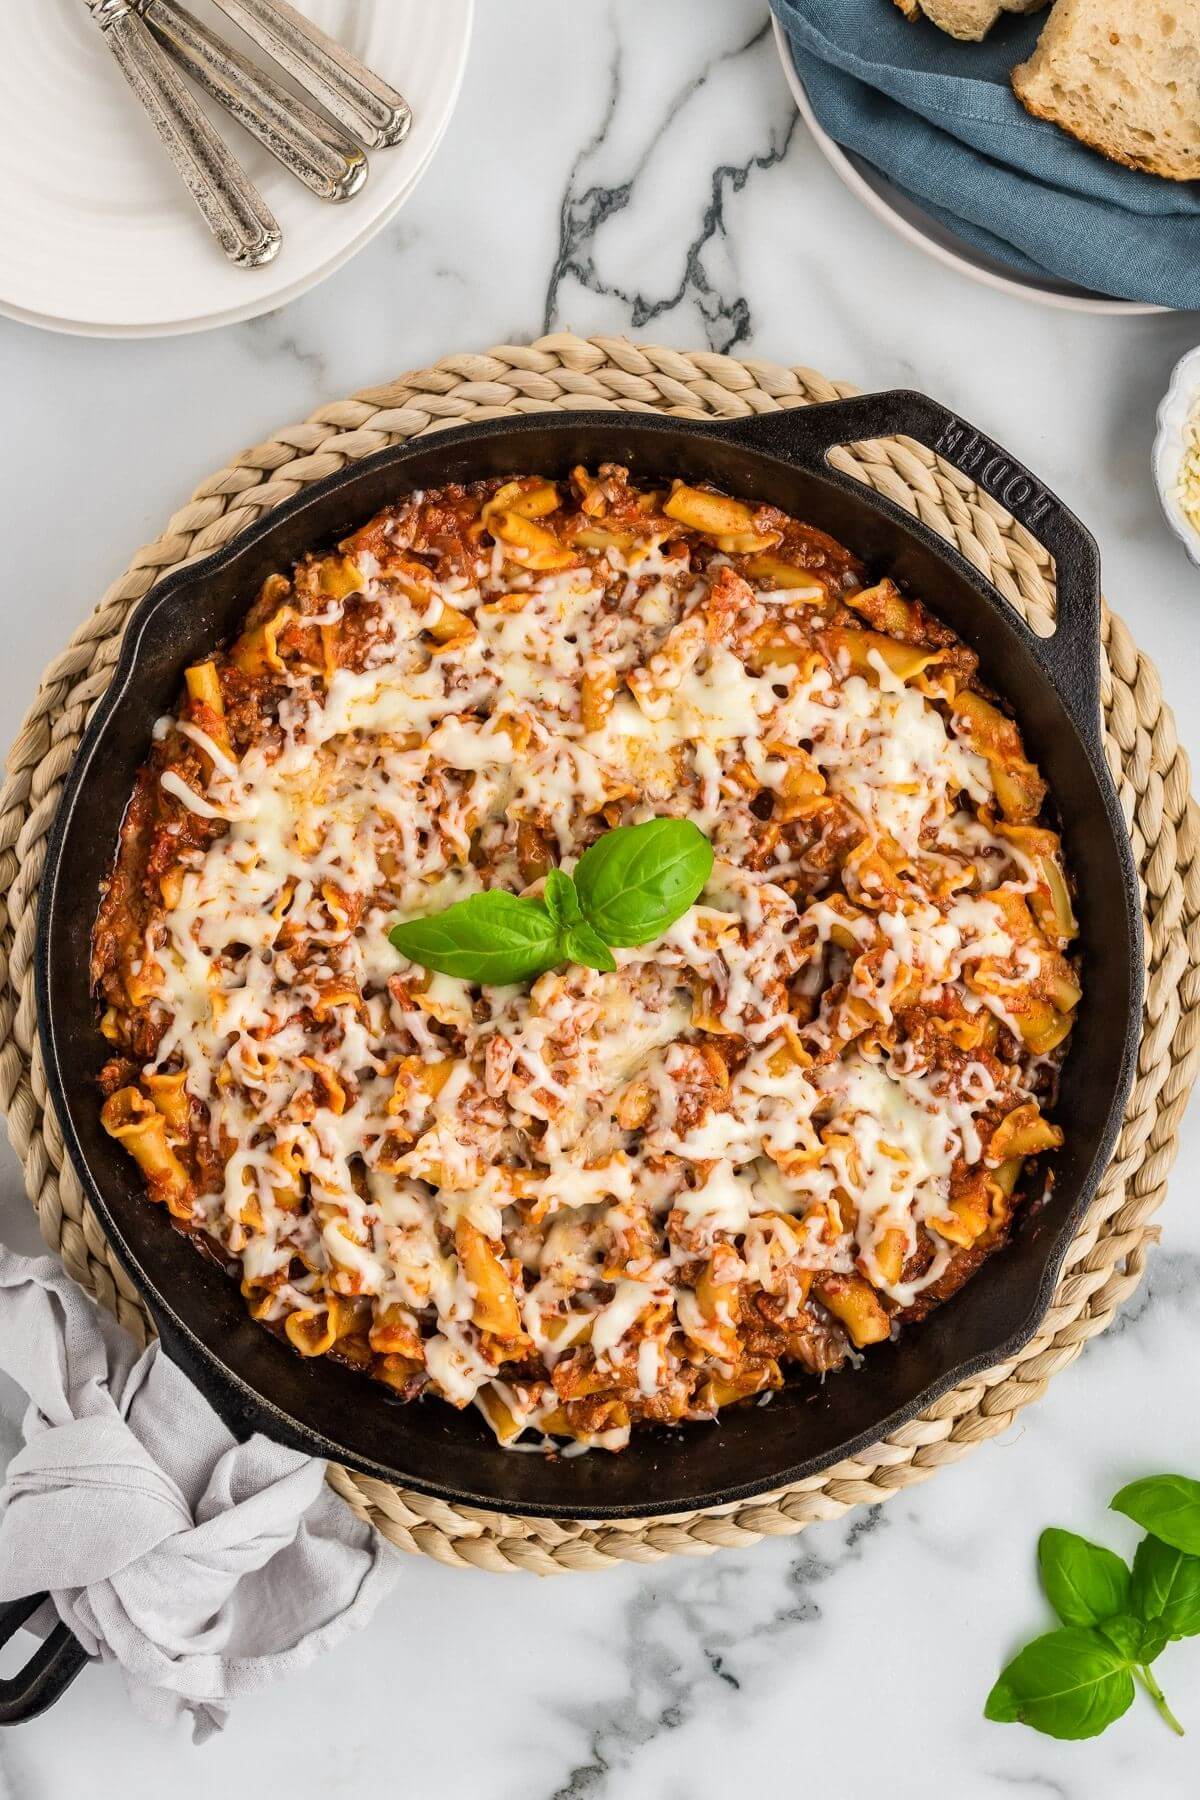 An iron pan is packed full of hamburger lasagna covered in cheeses with a sprig of greens in the center.